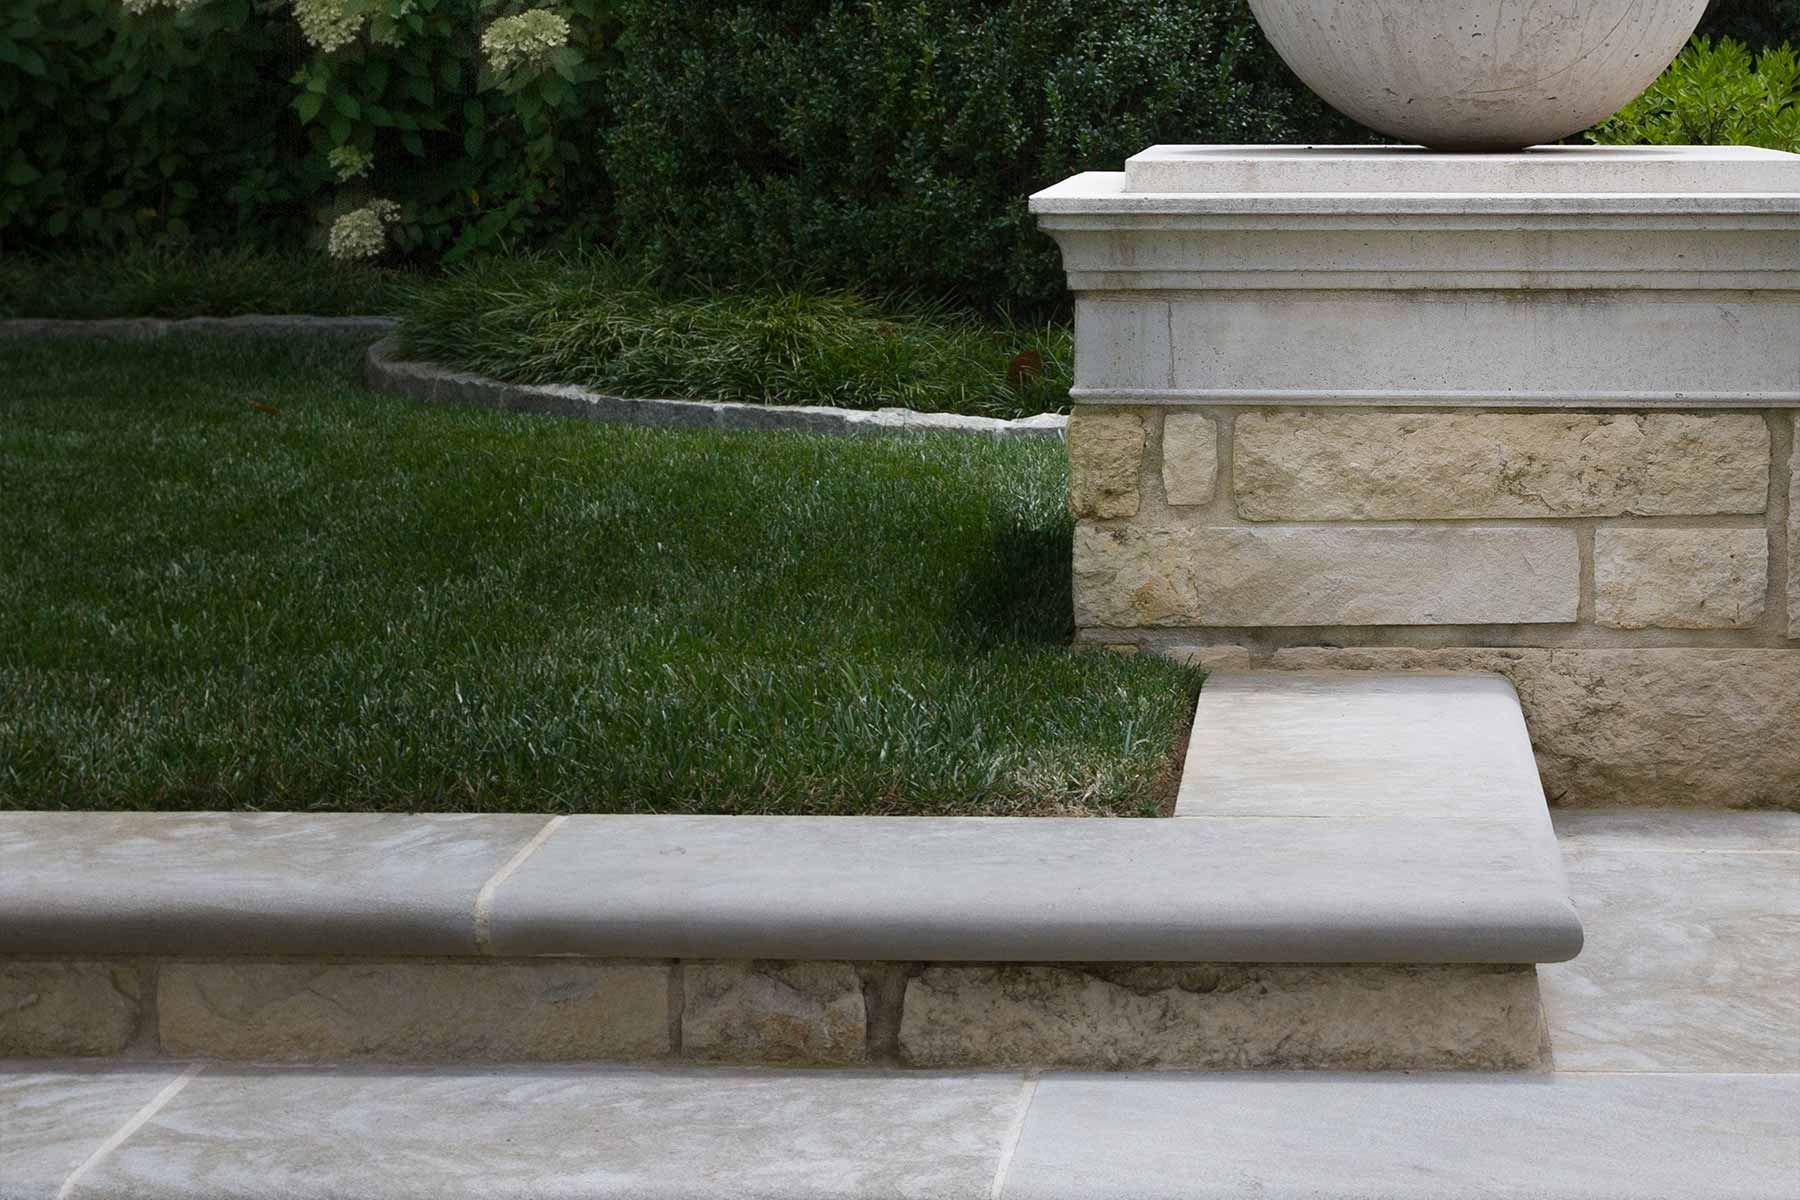 Detailing on the coping pavers leading to a large finial ball